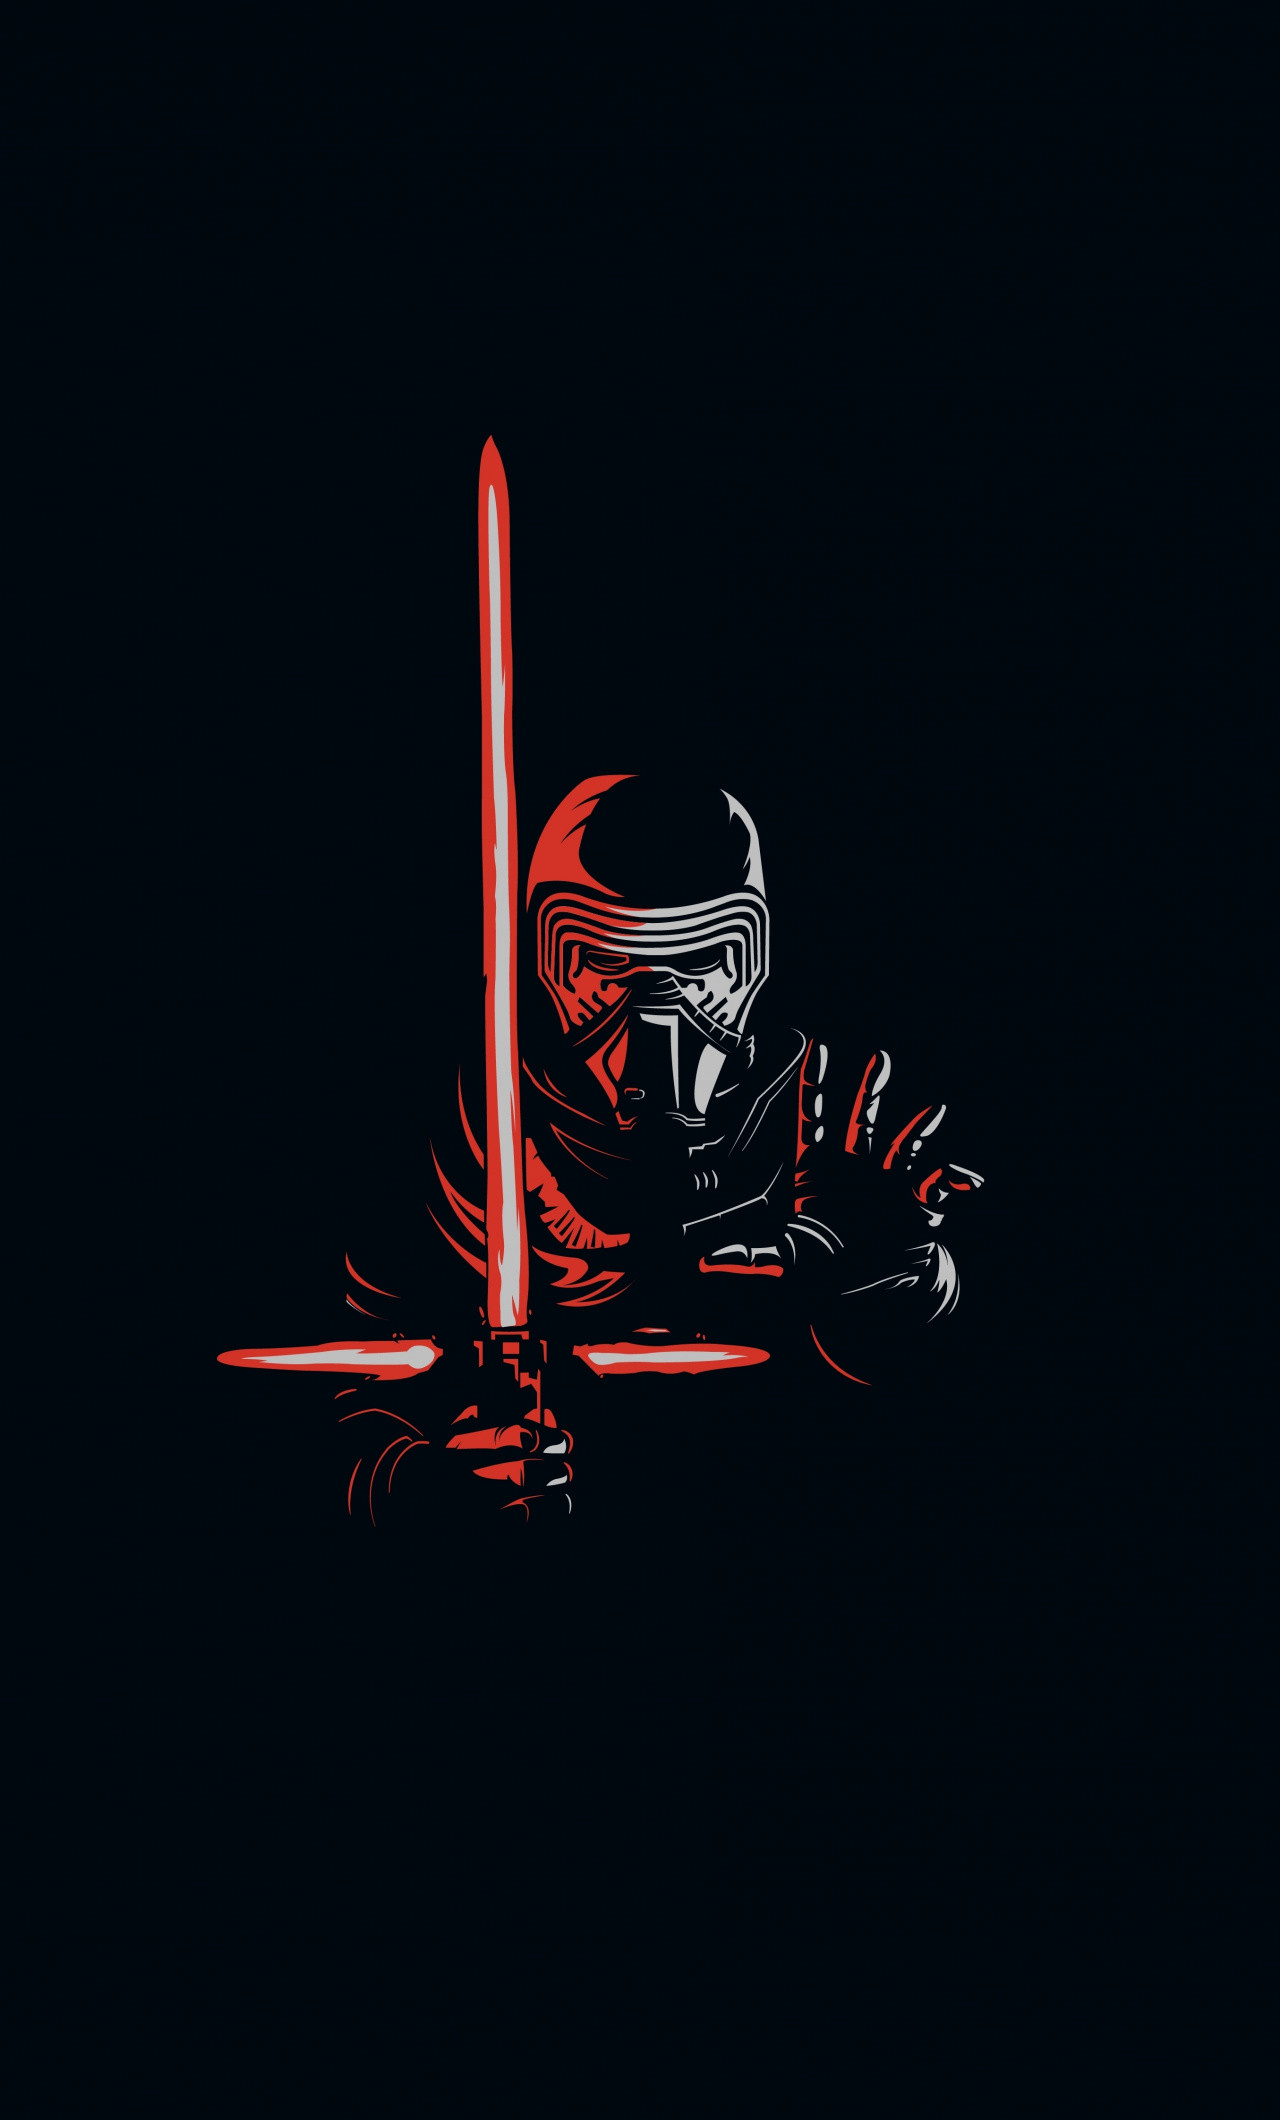 Kylo Ren Iphone Wallpaper - Love You In Different Languages - HD Wallpaper 